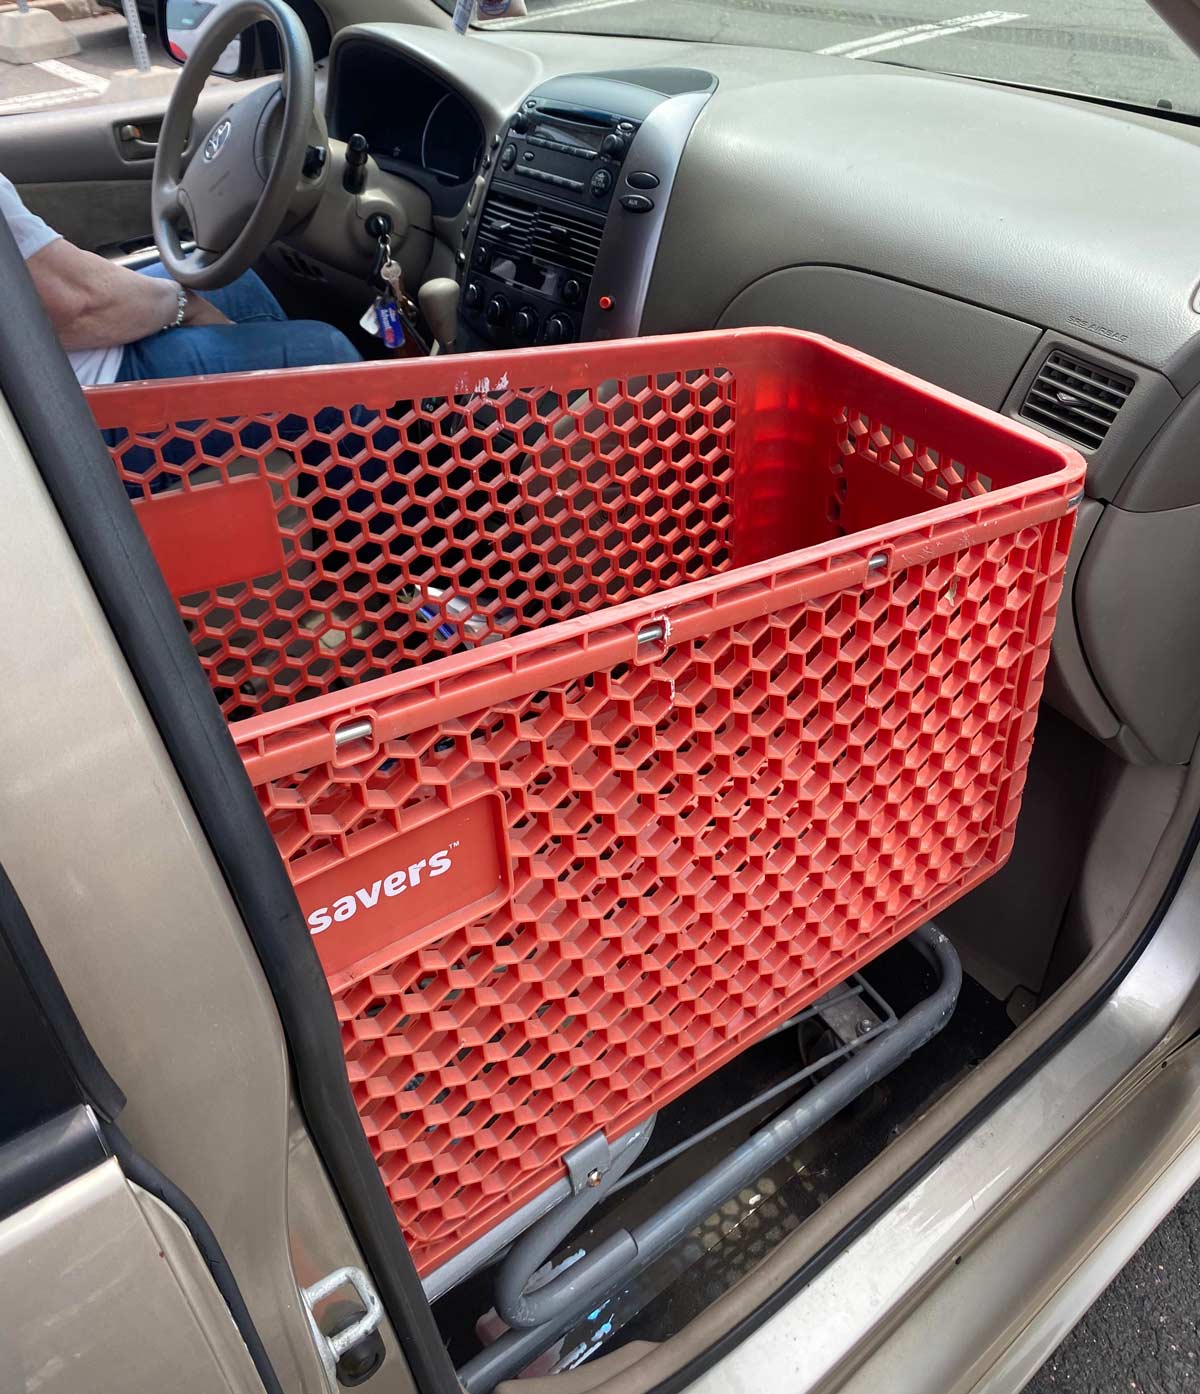 This customer replaced their passenger seat with a shopping cart